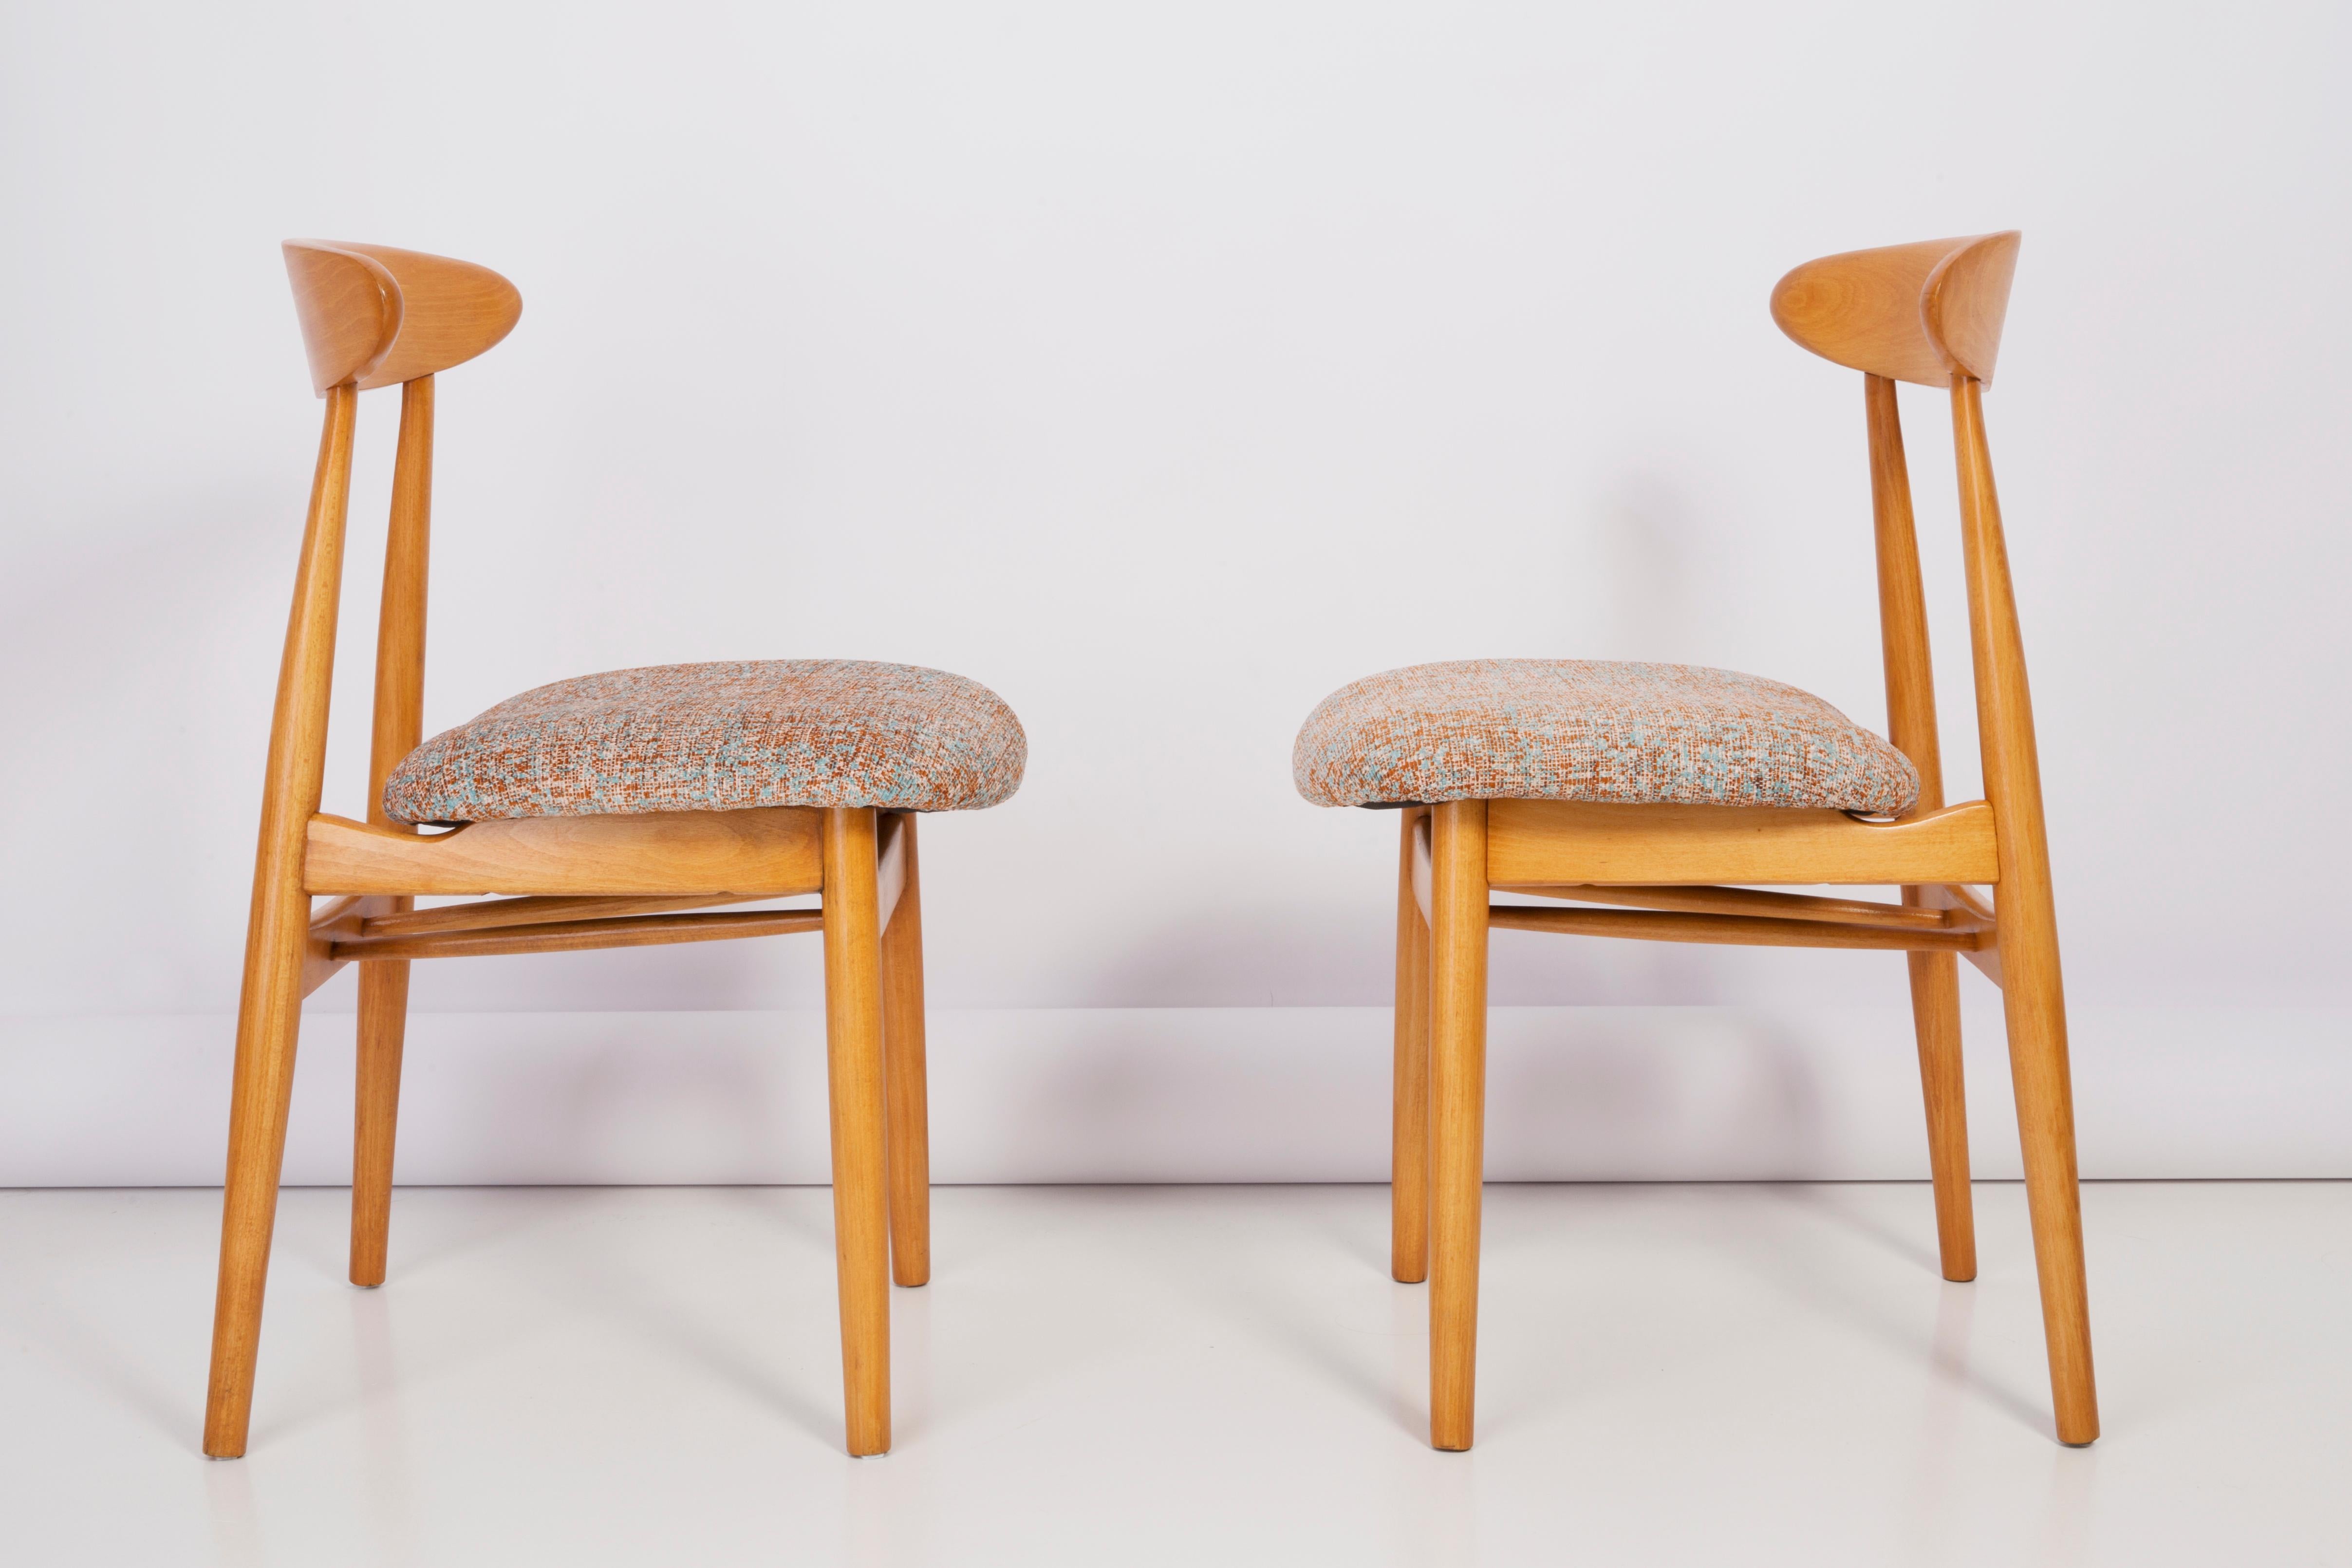 Chairs type 5908, designed in 1960s by Rajmund Teofil Halas, are one of the most recognizable projects of polish design.

The chairs have a simple, modernist silhouette. They are characterized by streamlined, organic characteristic shapes for